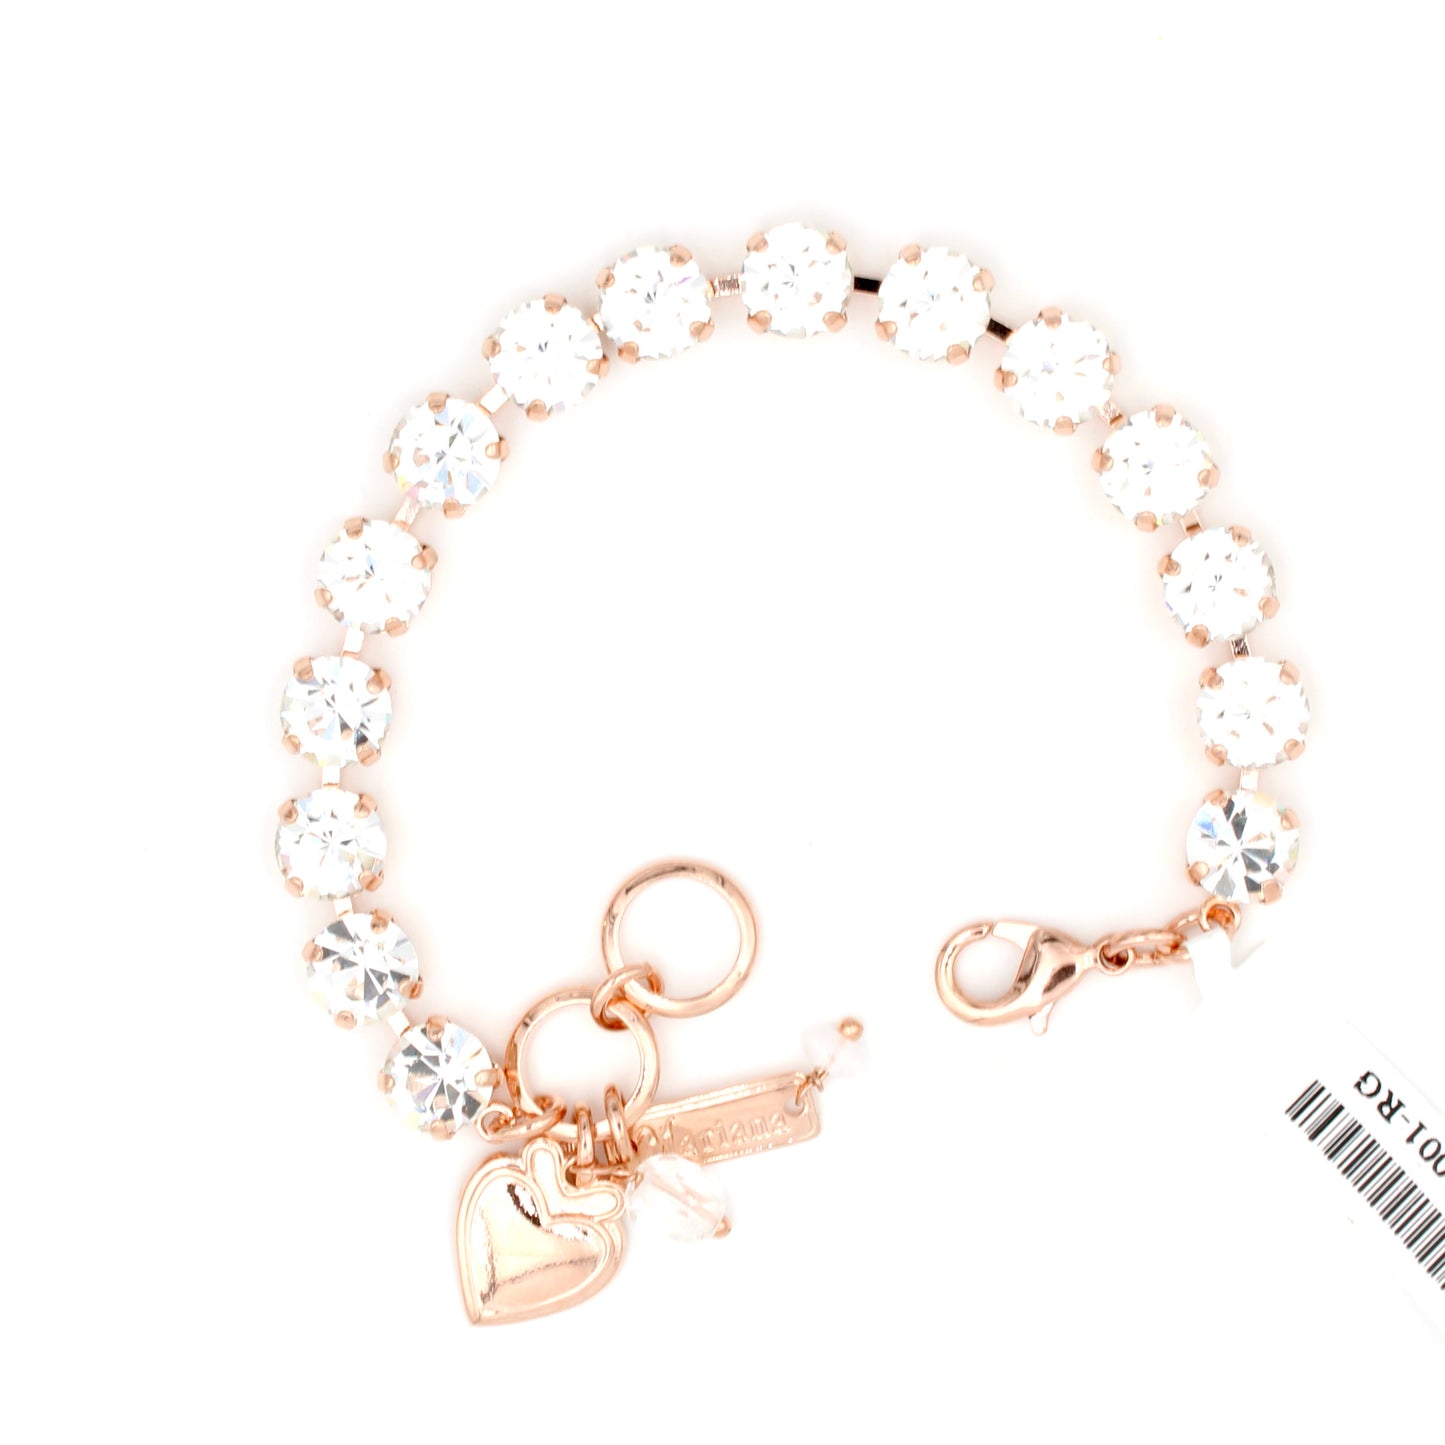 Clear Sparkly Medium Must Have Everyday Bracelet in Rose Gold - MaryTyke's